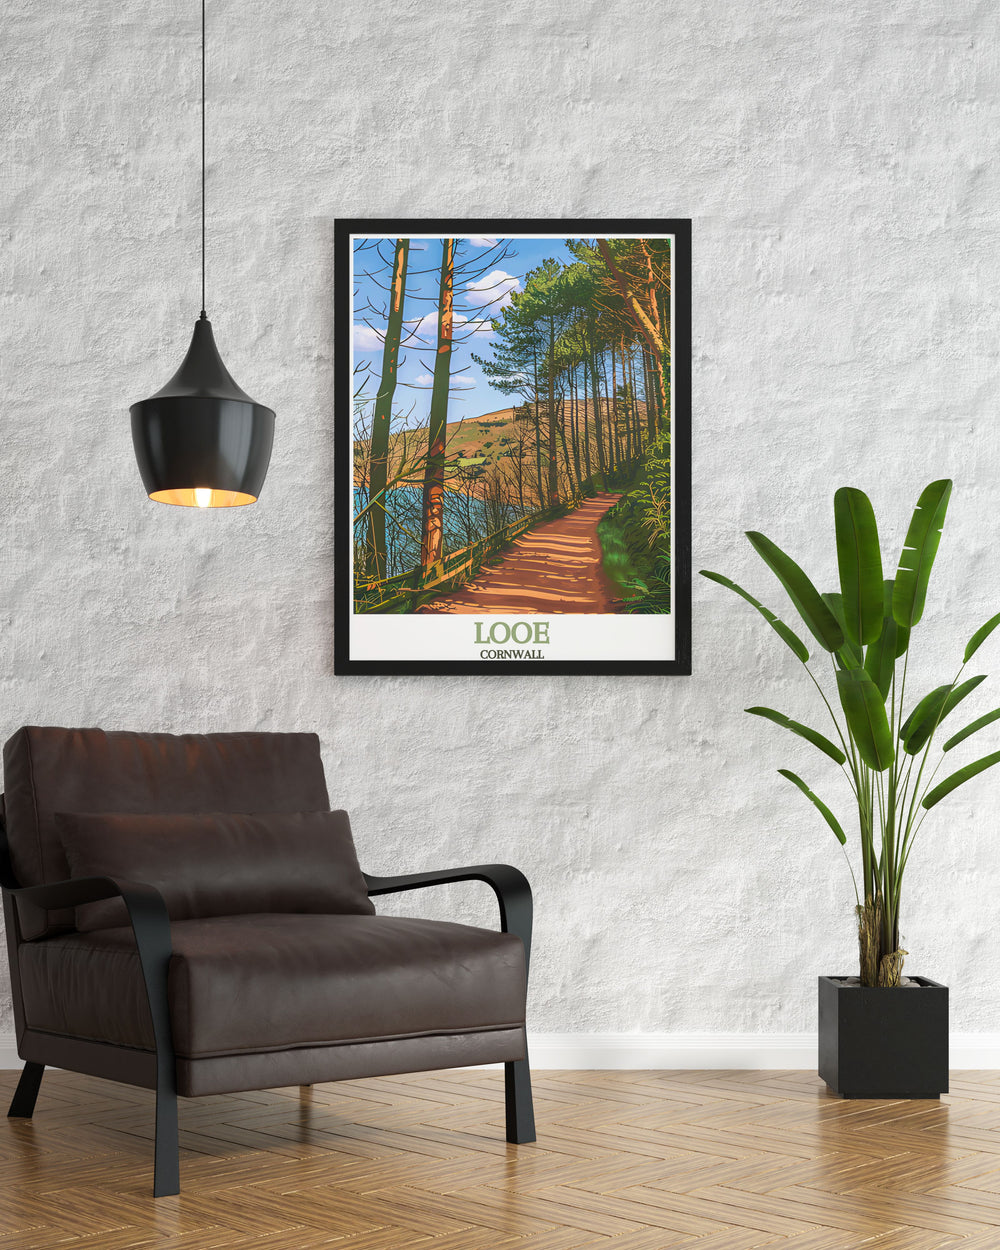 Beautiful The Kilminorth Woods modern prints featuring a vibrant illustration of the picturesque woodland in Cornwall these travel prints bring the tranquility of The Kilminorth Woods into your living space making them a stunning addition to any home decor collection.